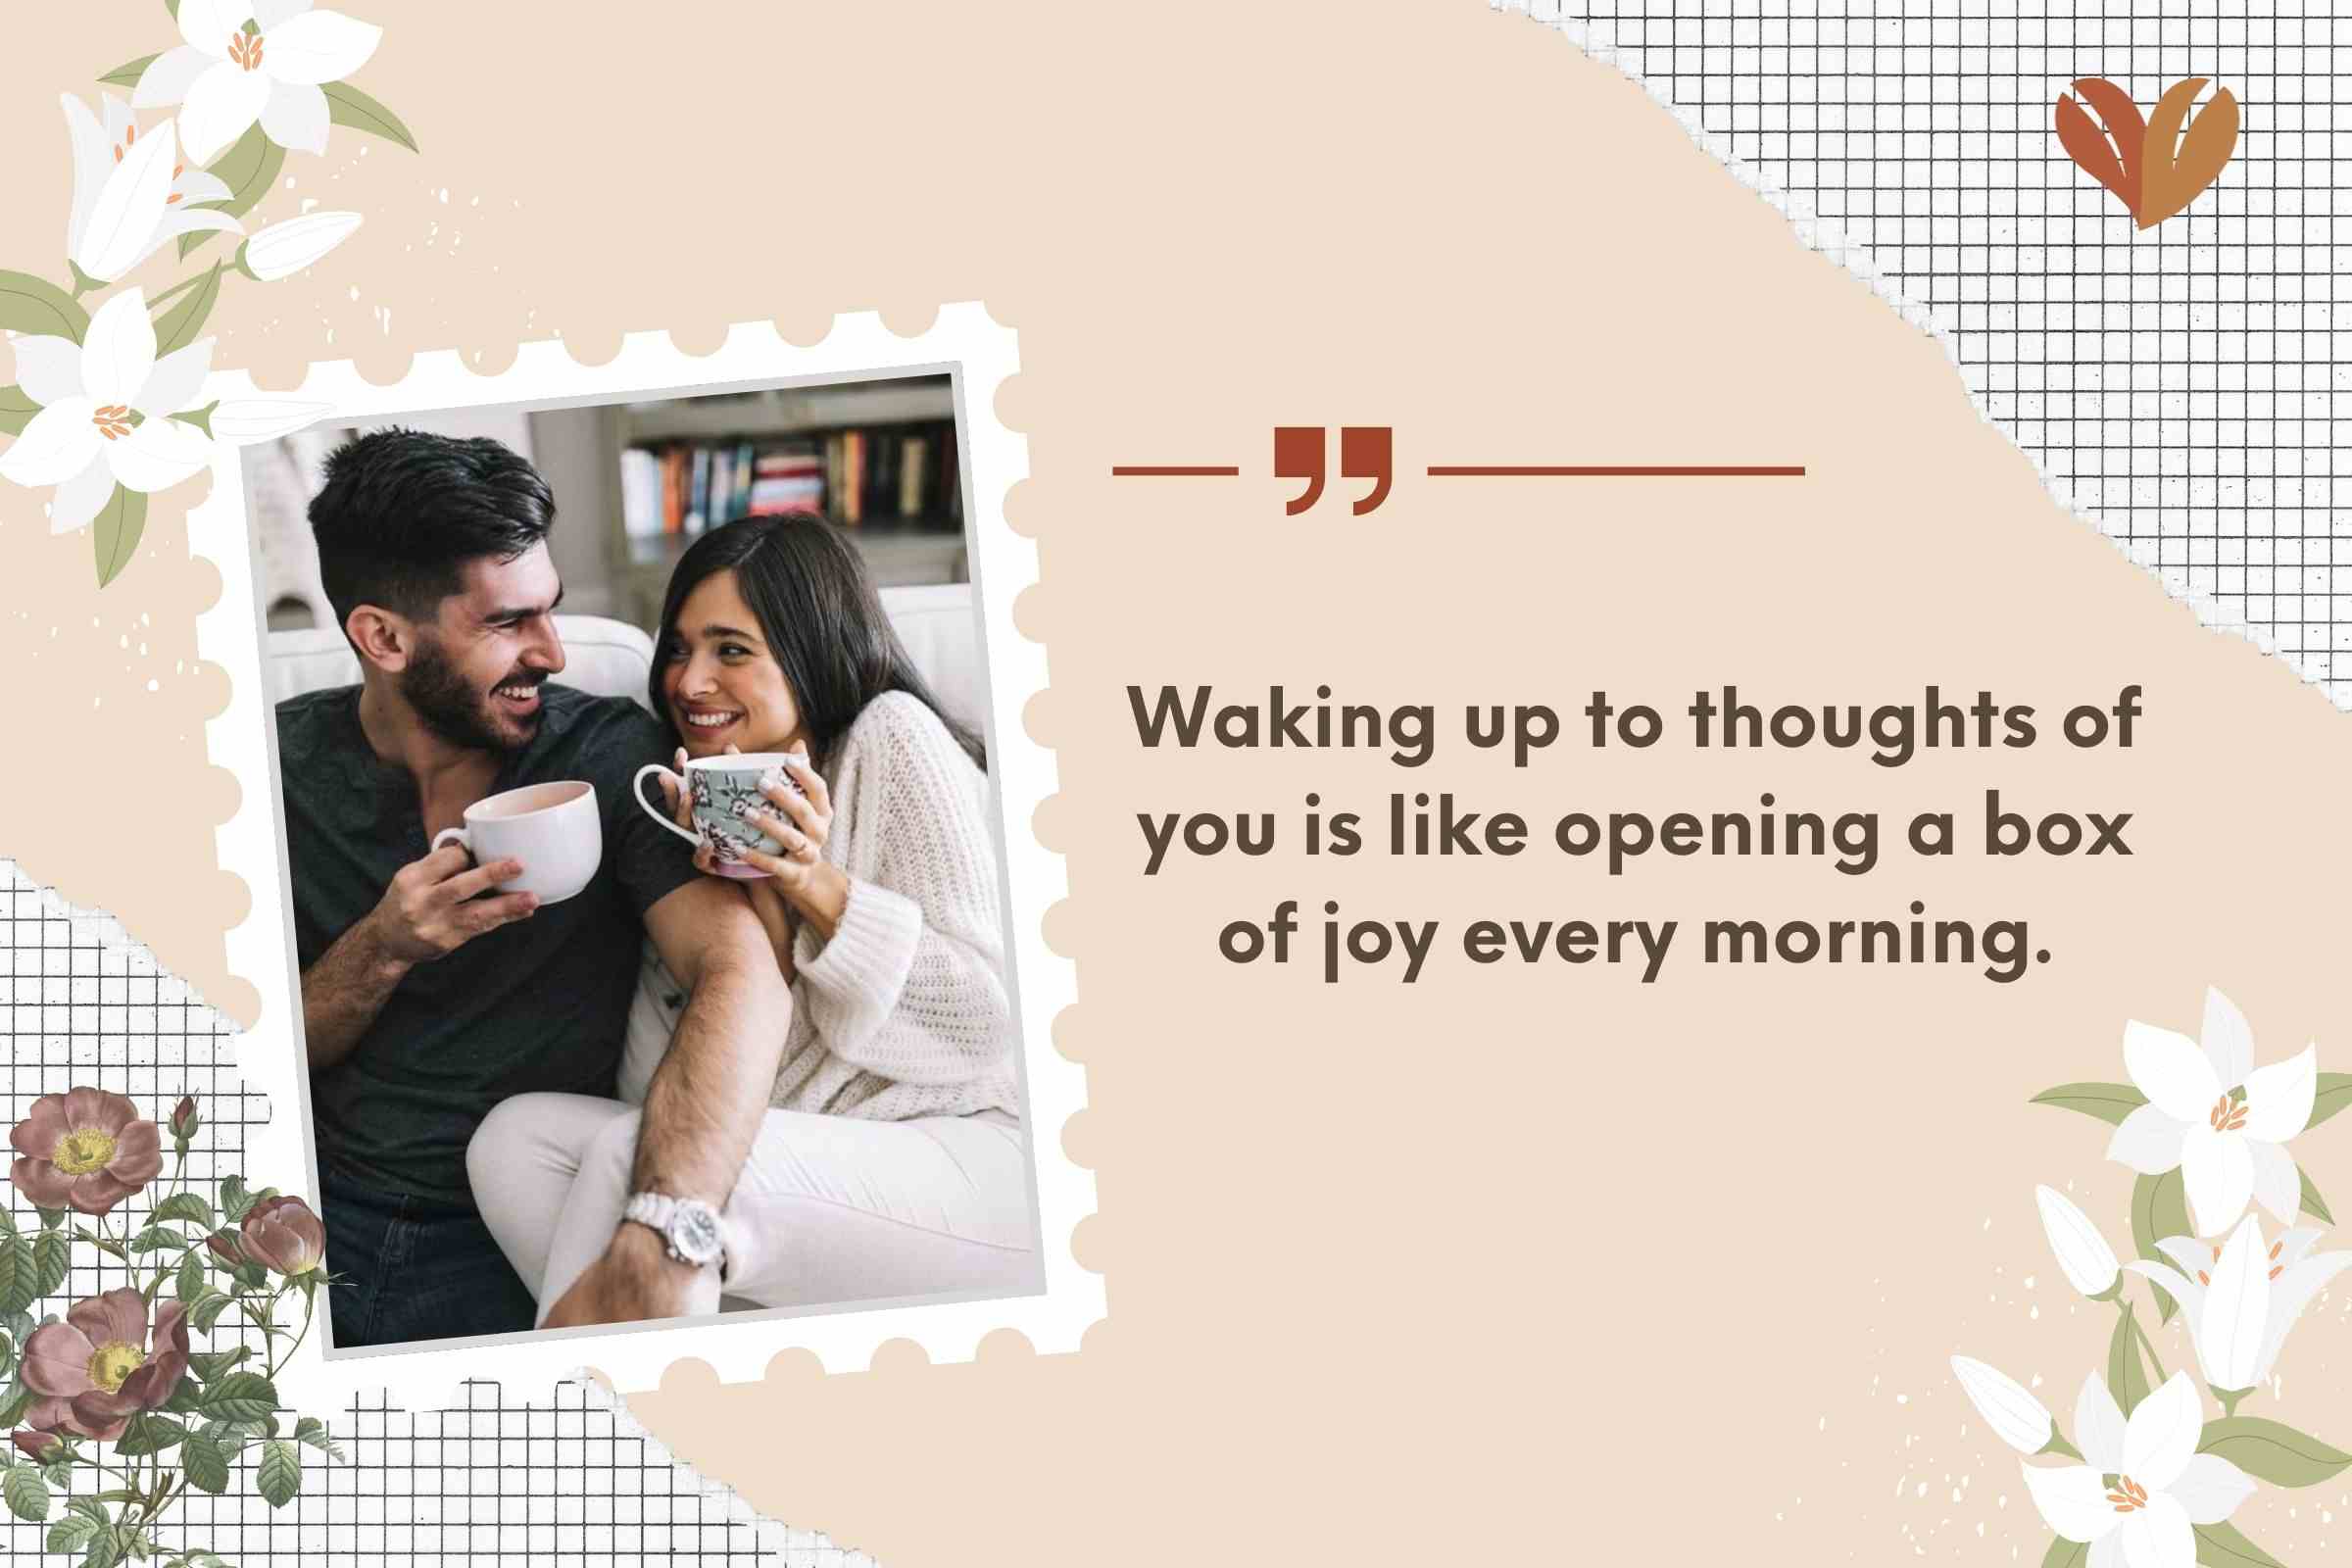 Waking up to thoughts of you is like opening a box of joy every morning.